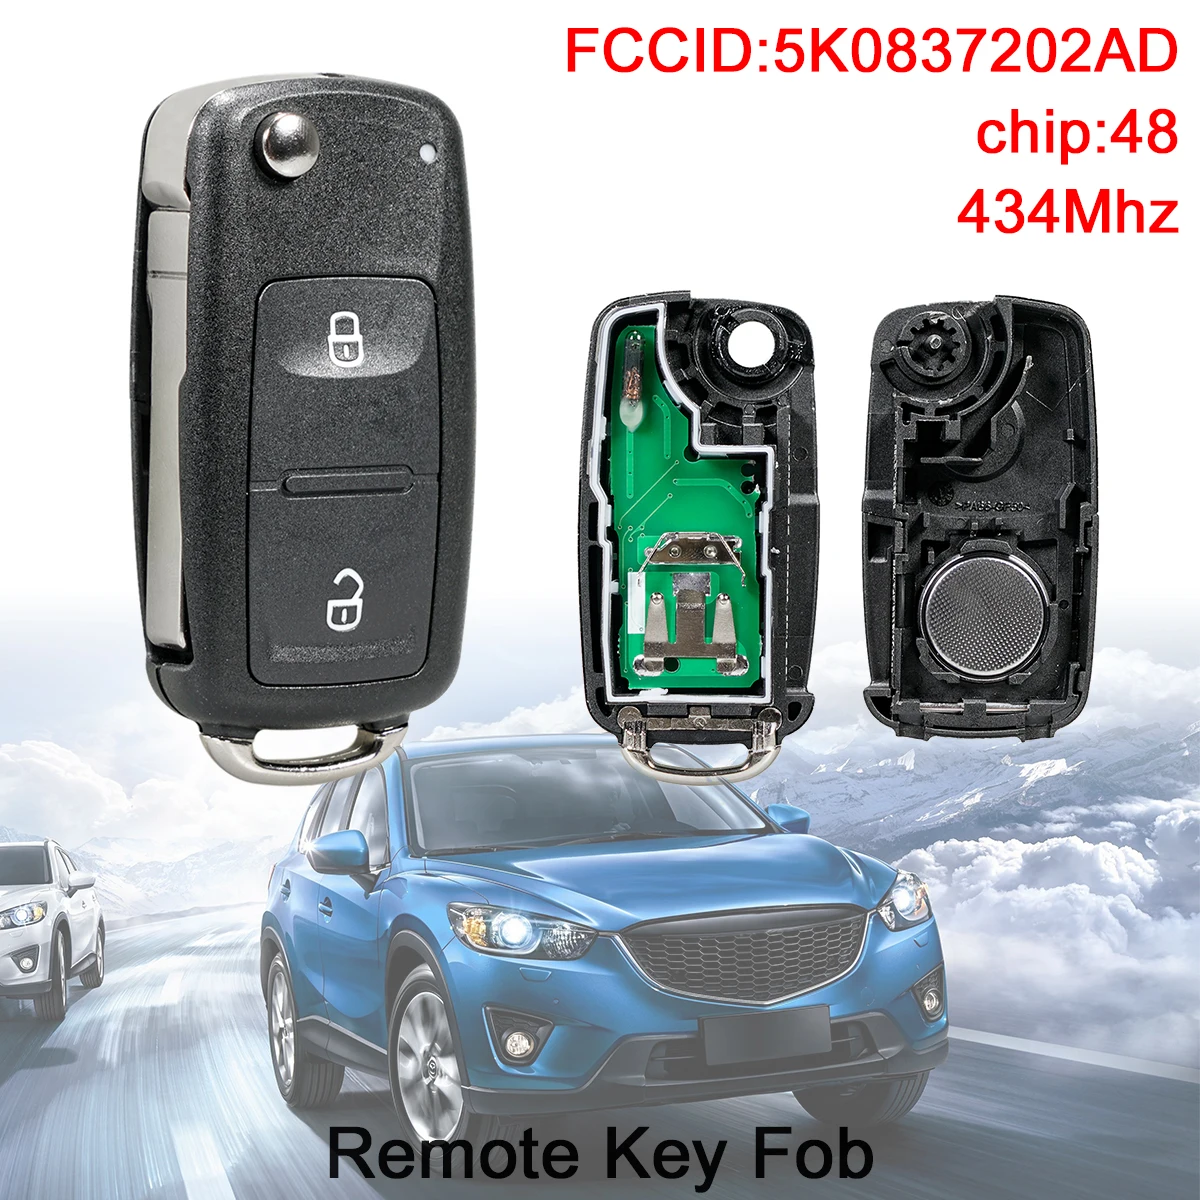 2 Buttons 433MHz  Keyless Smart Remote Car Key Fob with ID48 Chip5K0837202AD Fit for Volkswagen VW  Transporter 2011-2016